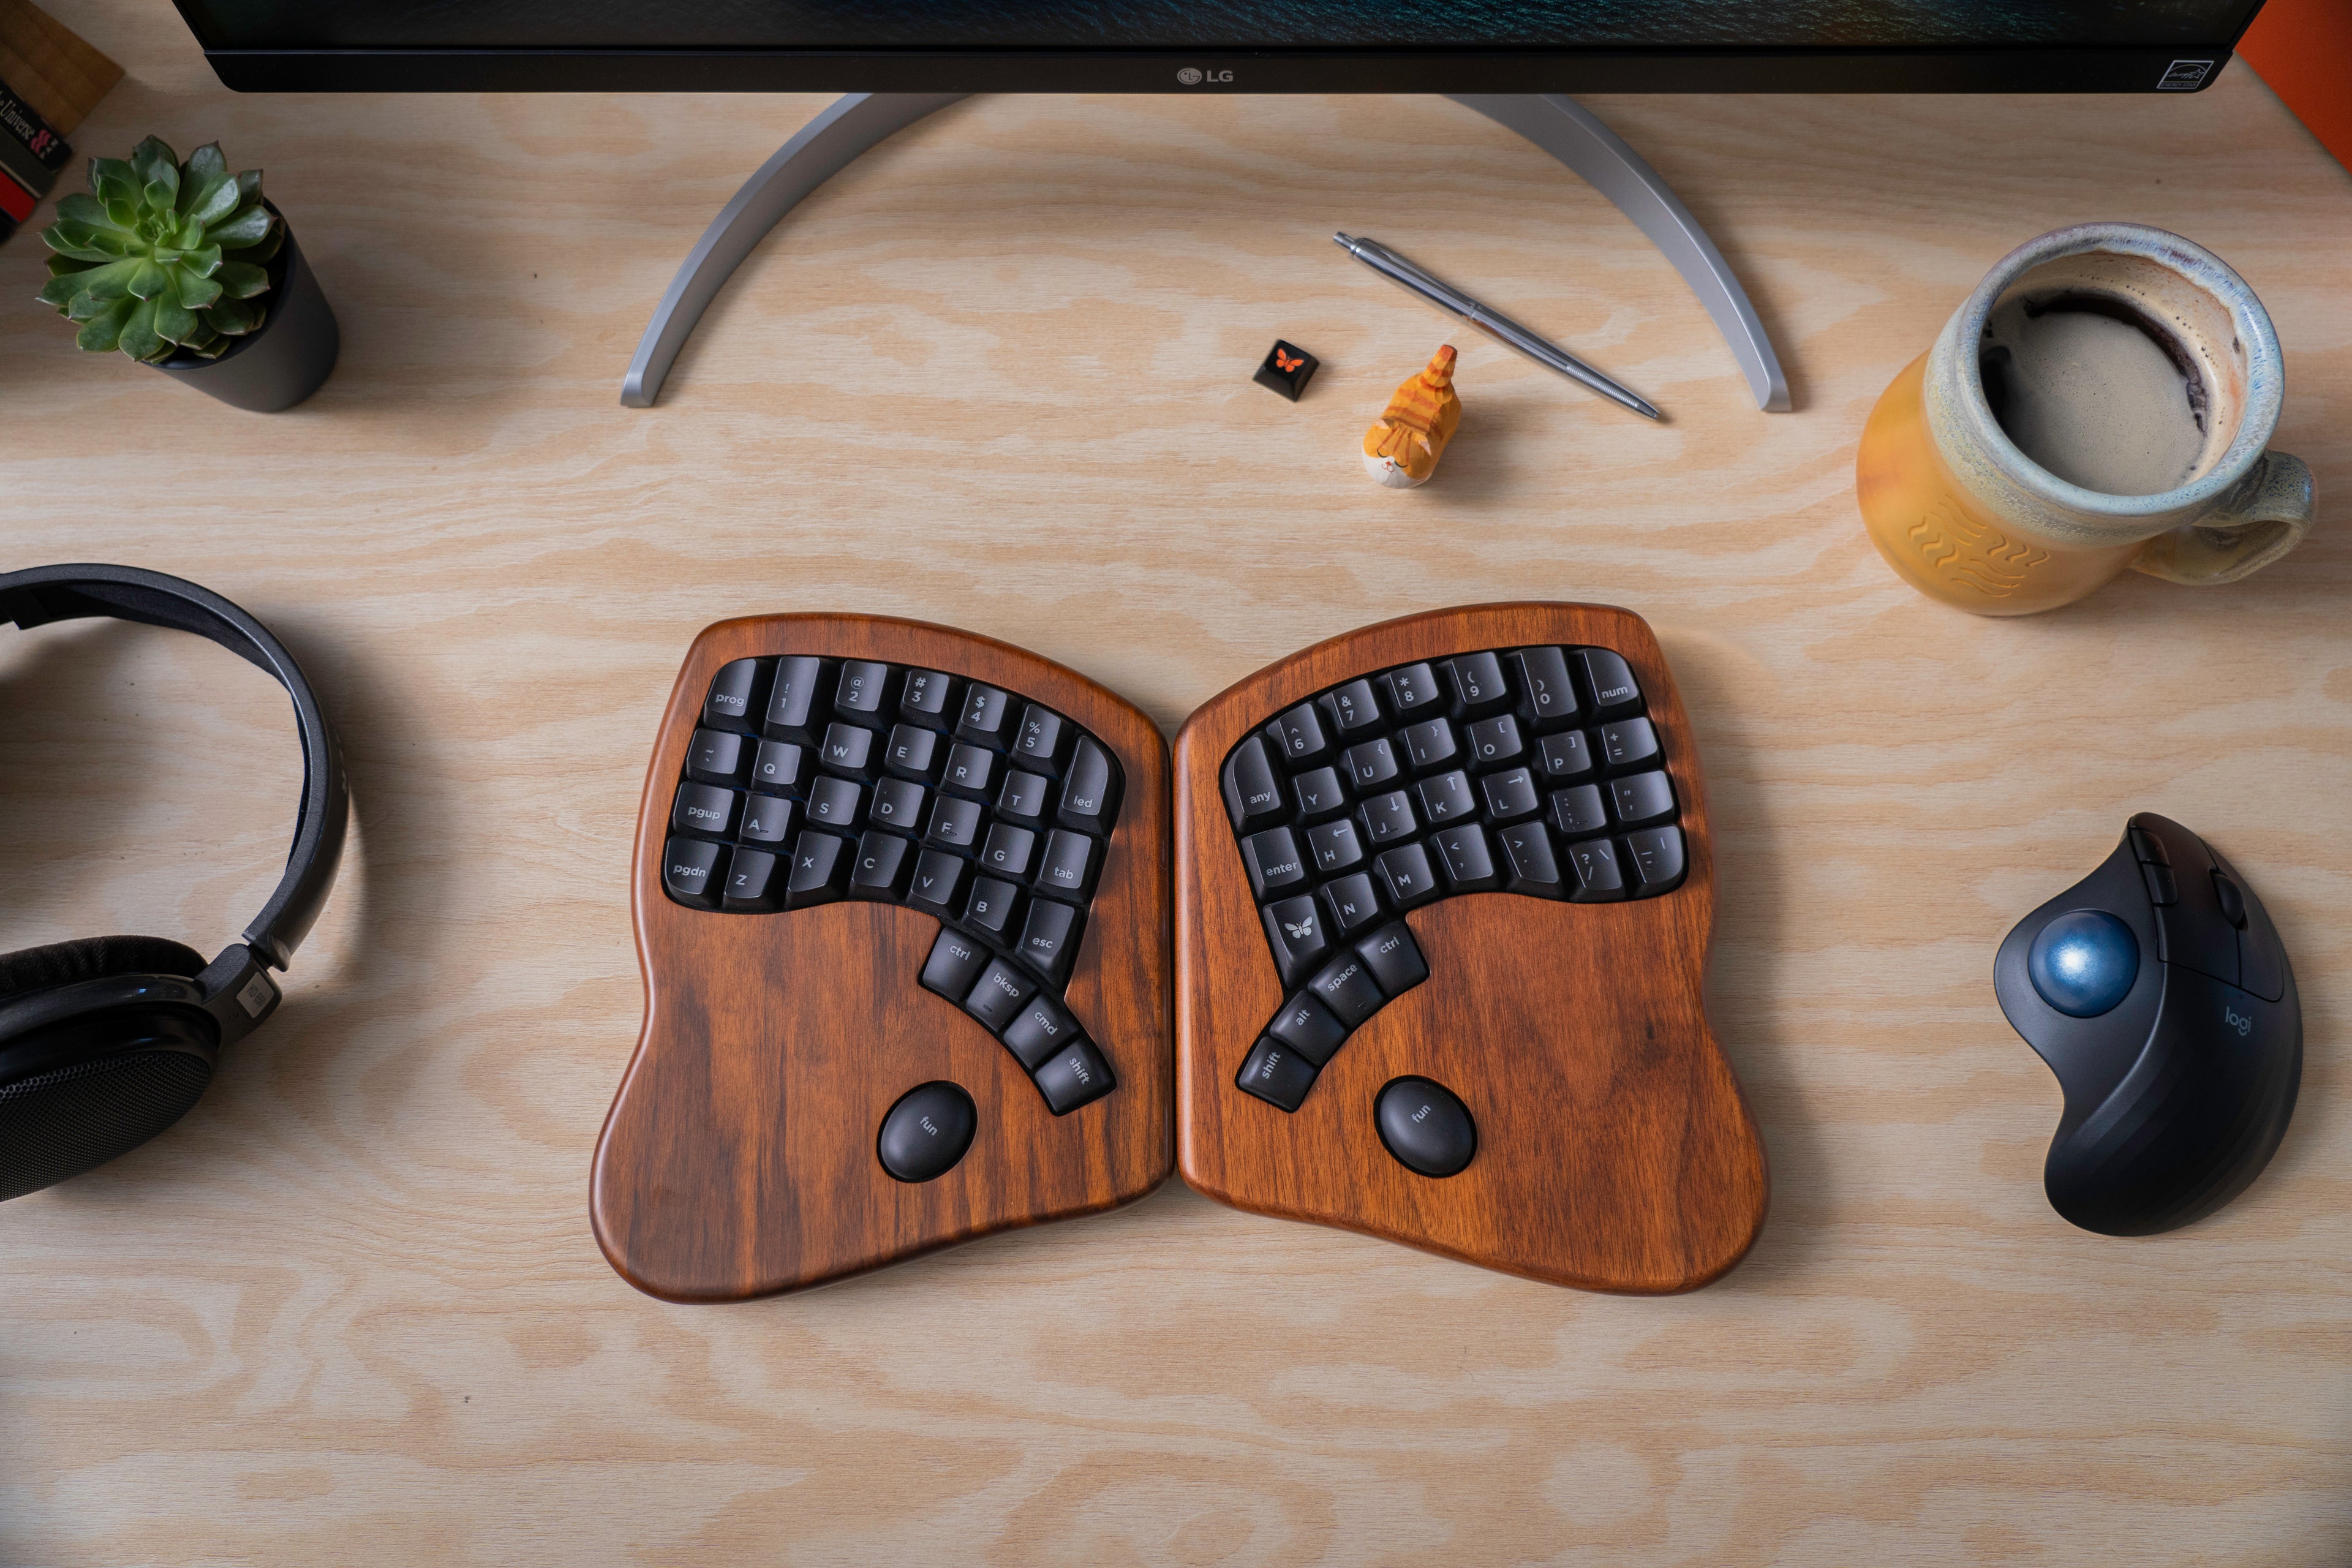 Load video: An introduction to the Keyboardio Model 100